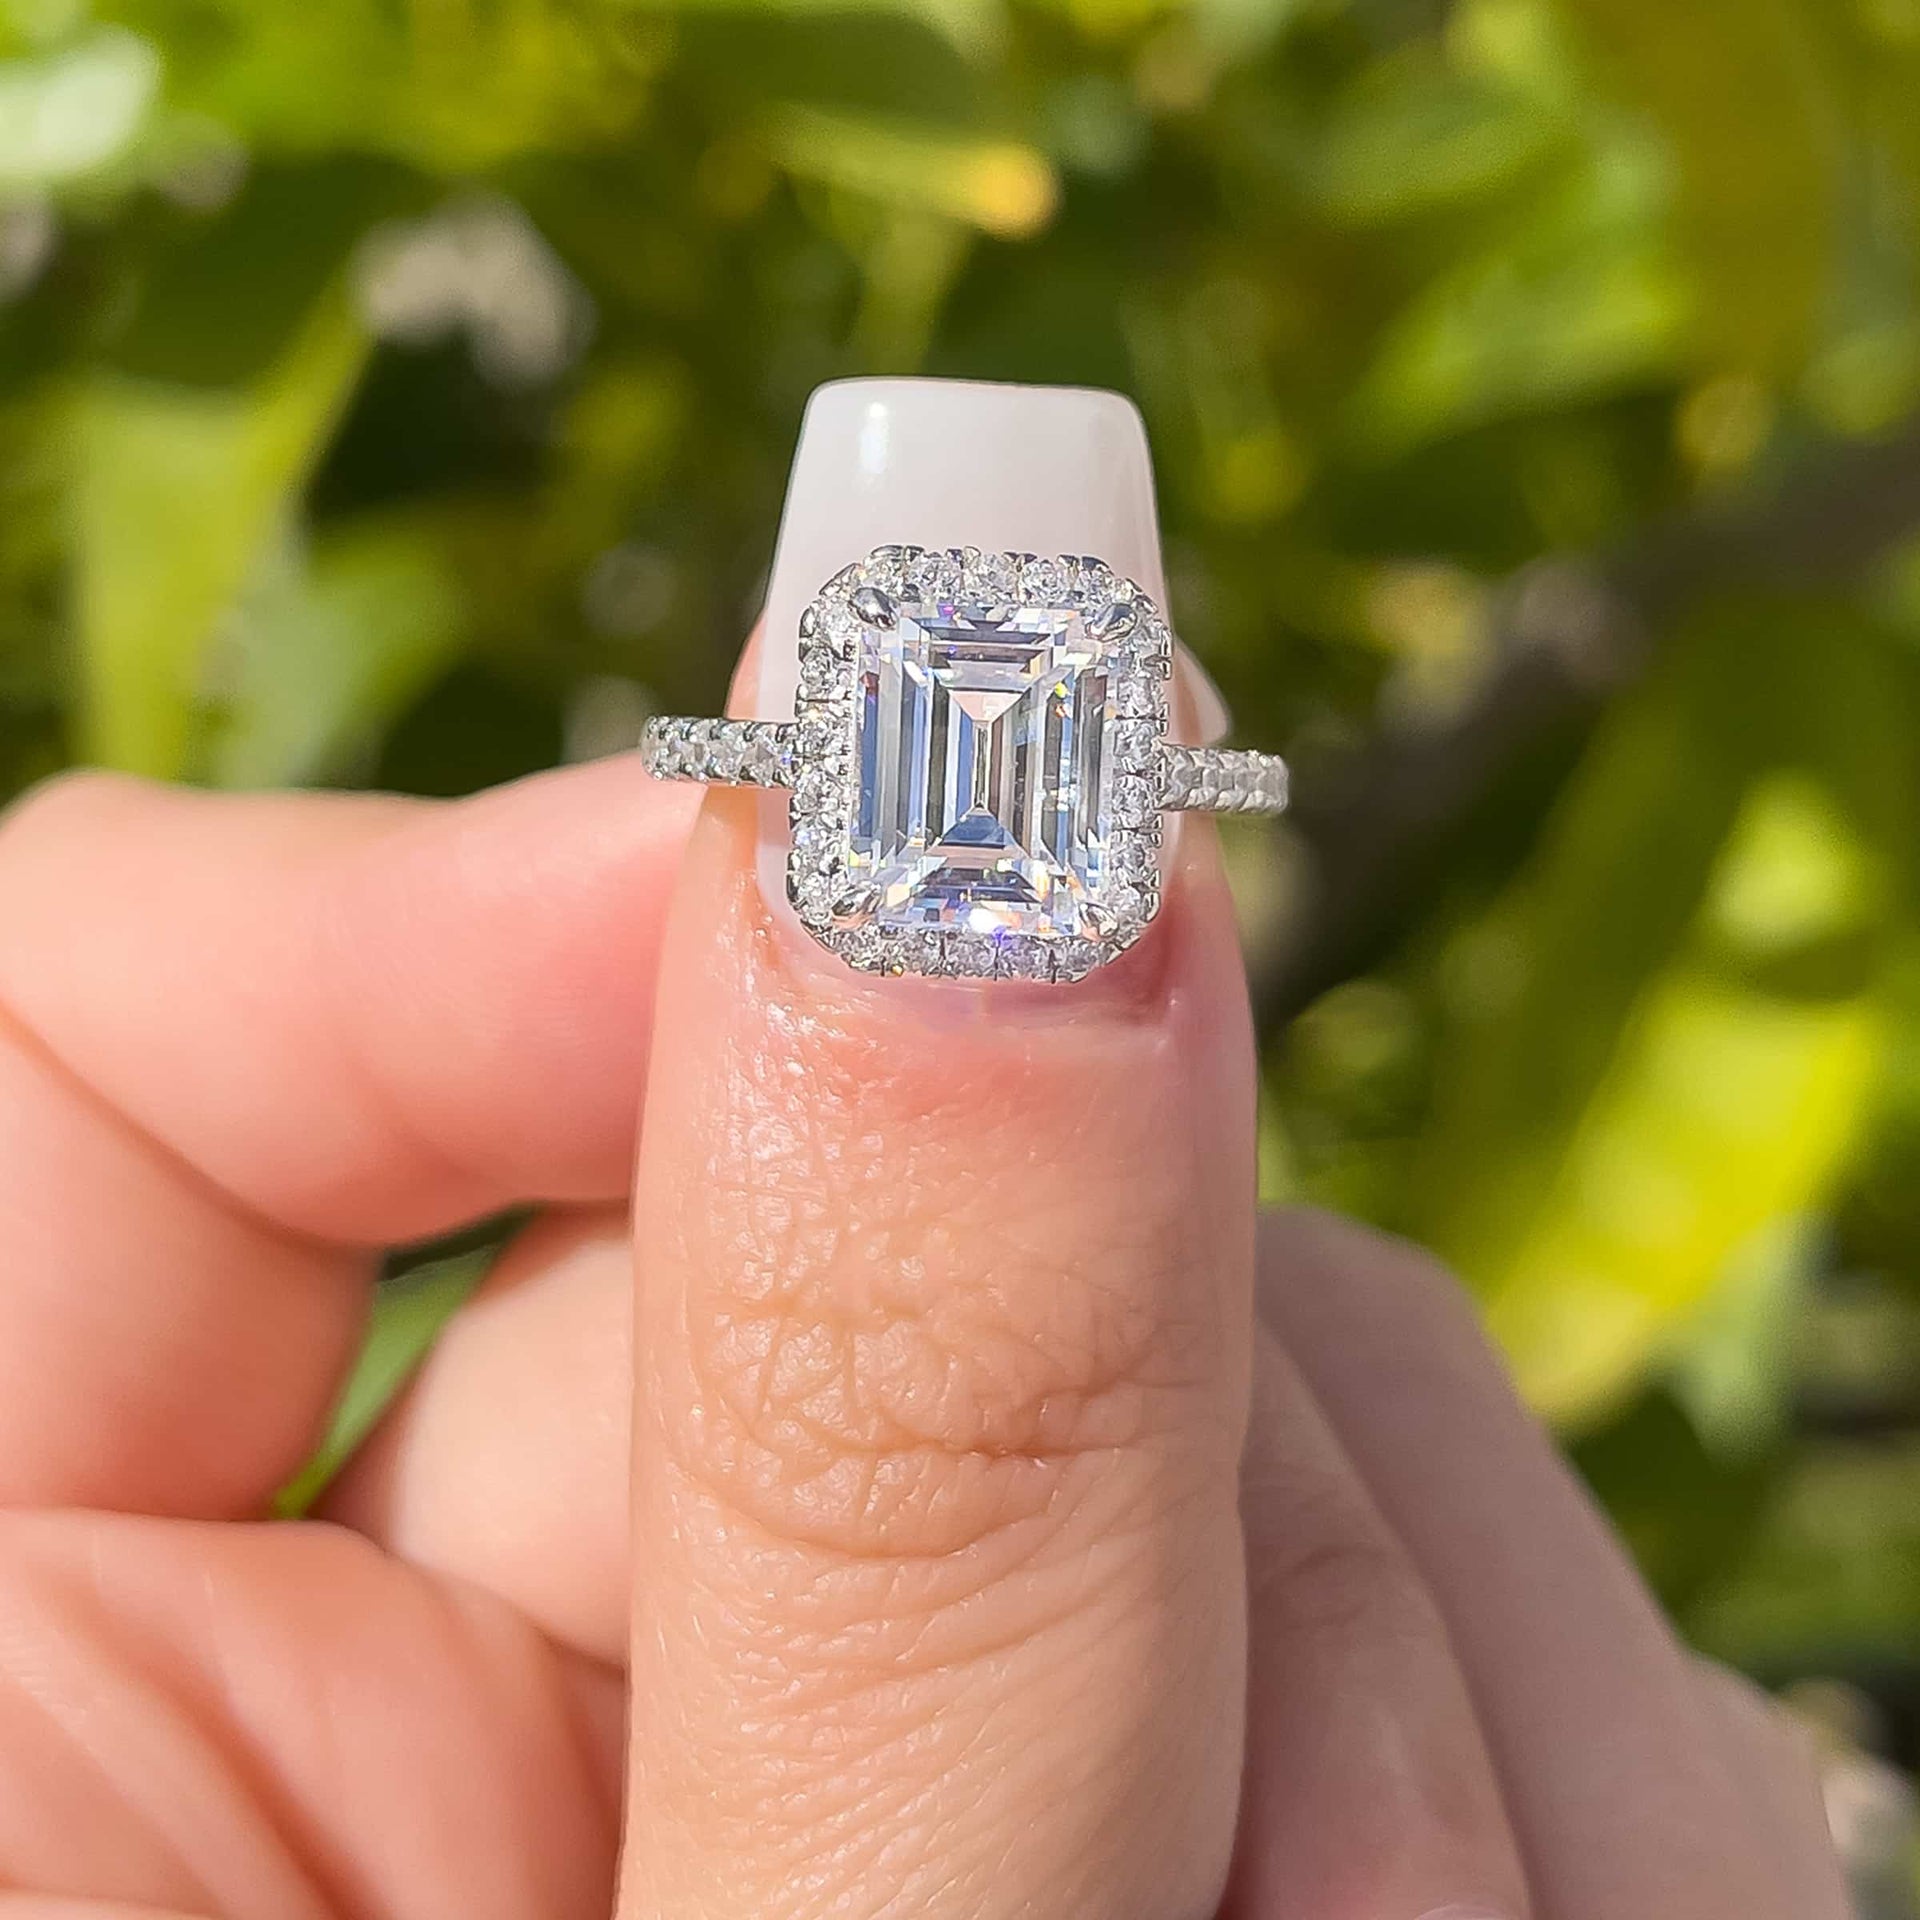 3 carat engagement ring shown in silver on thumb in front of outside greenery